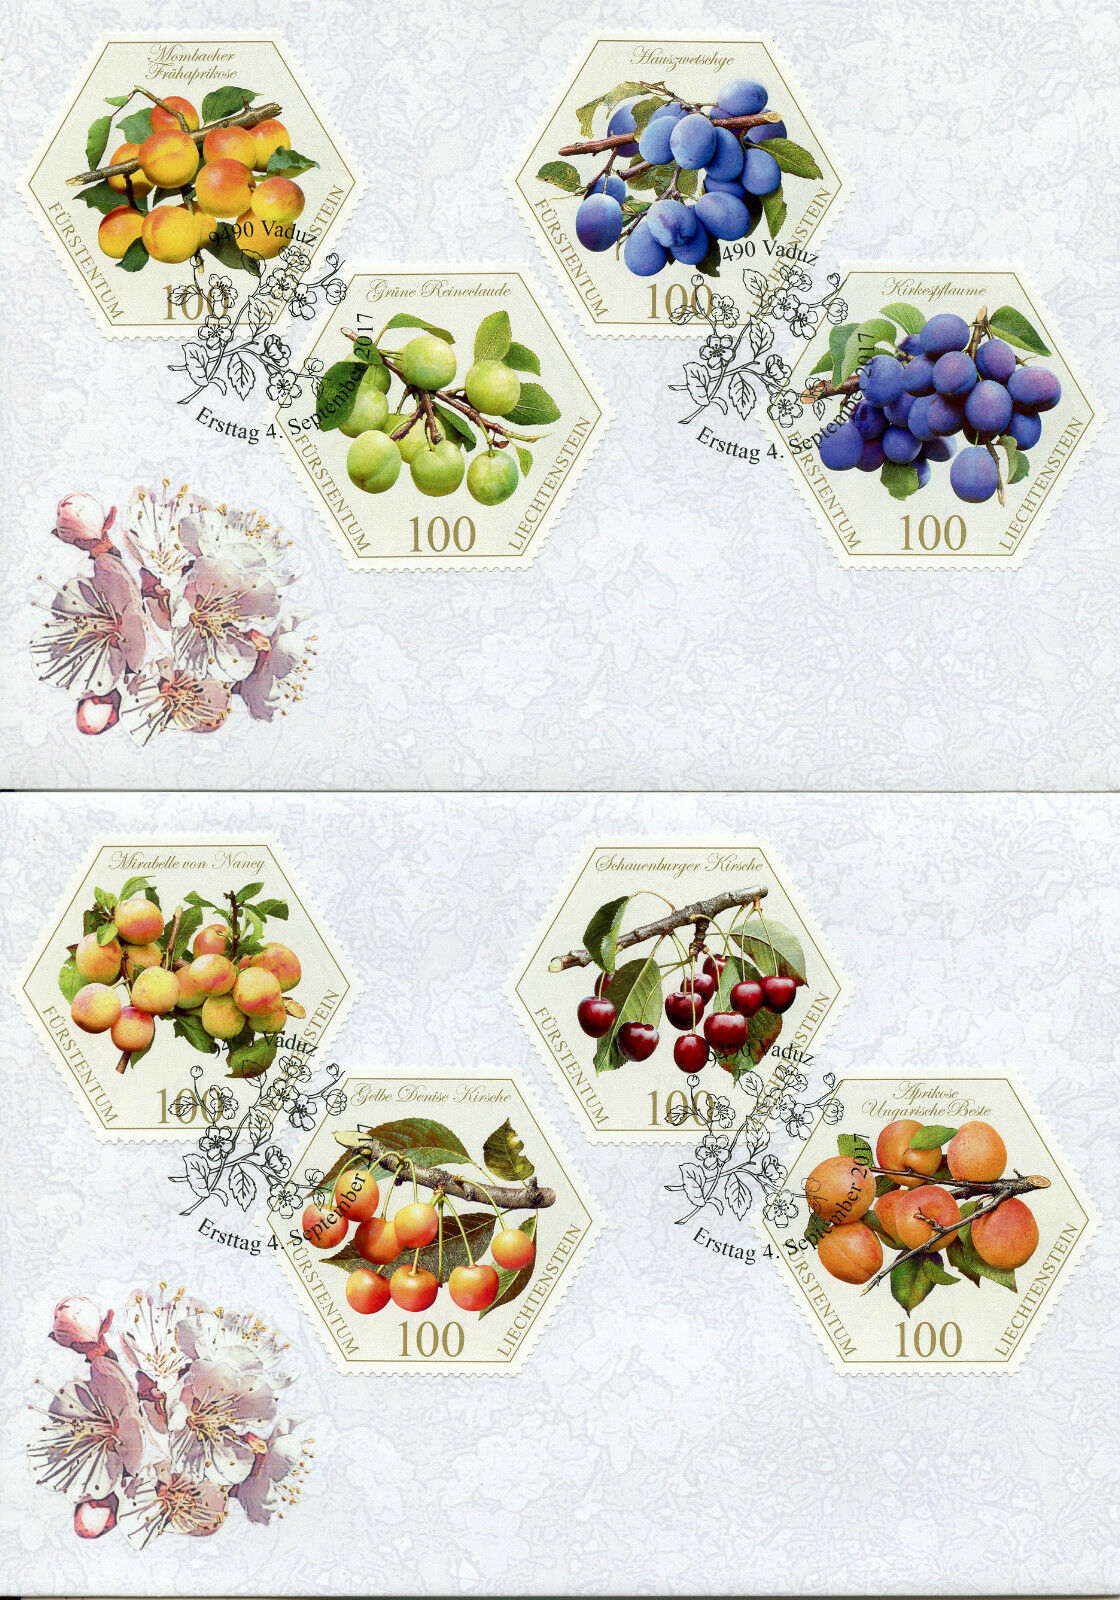 Liechtenstein 2017 FDC Old Fruit Varieties Stone Fruits 8v Set 2 Covers Stamps